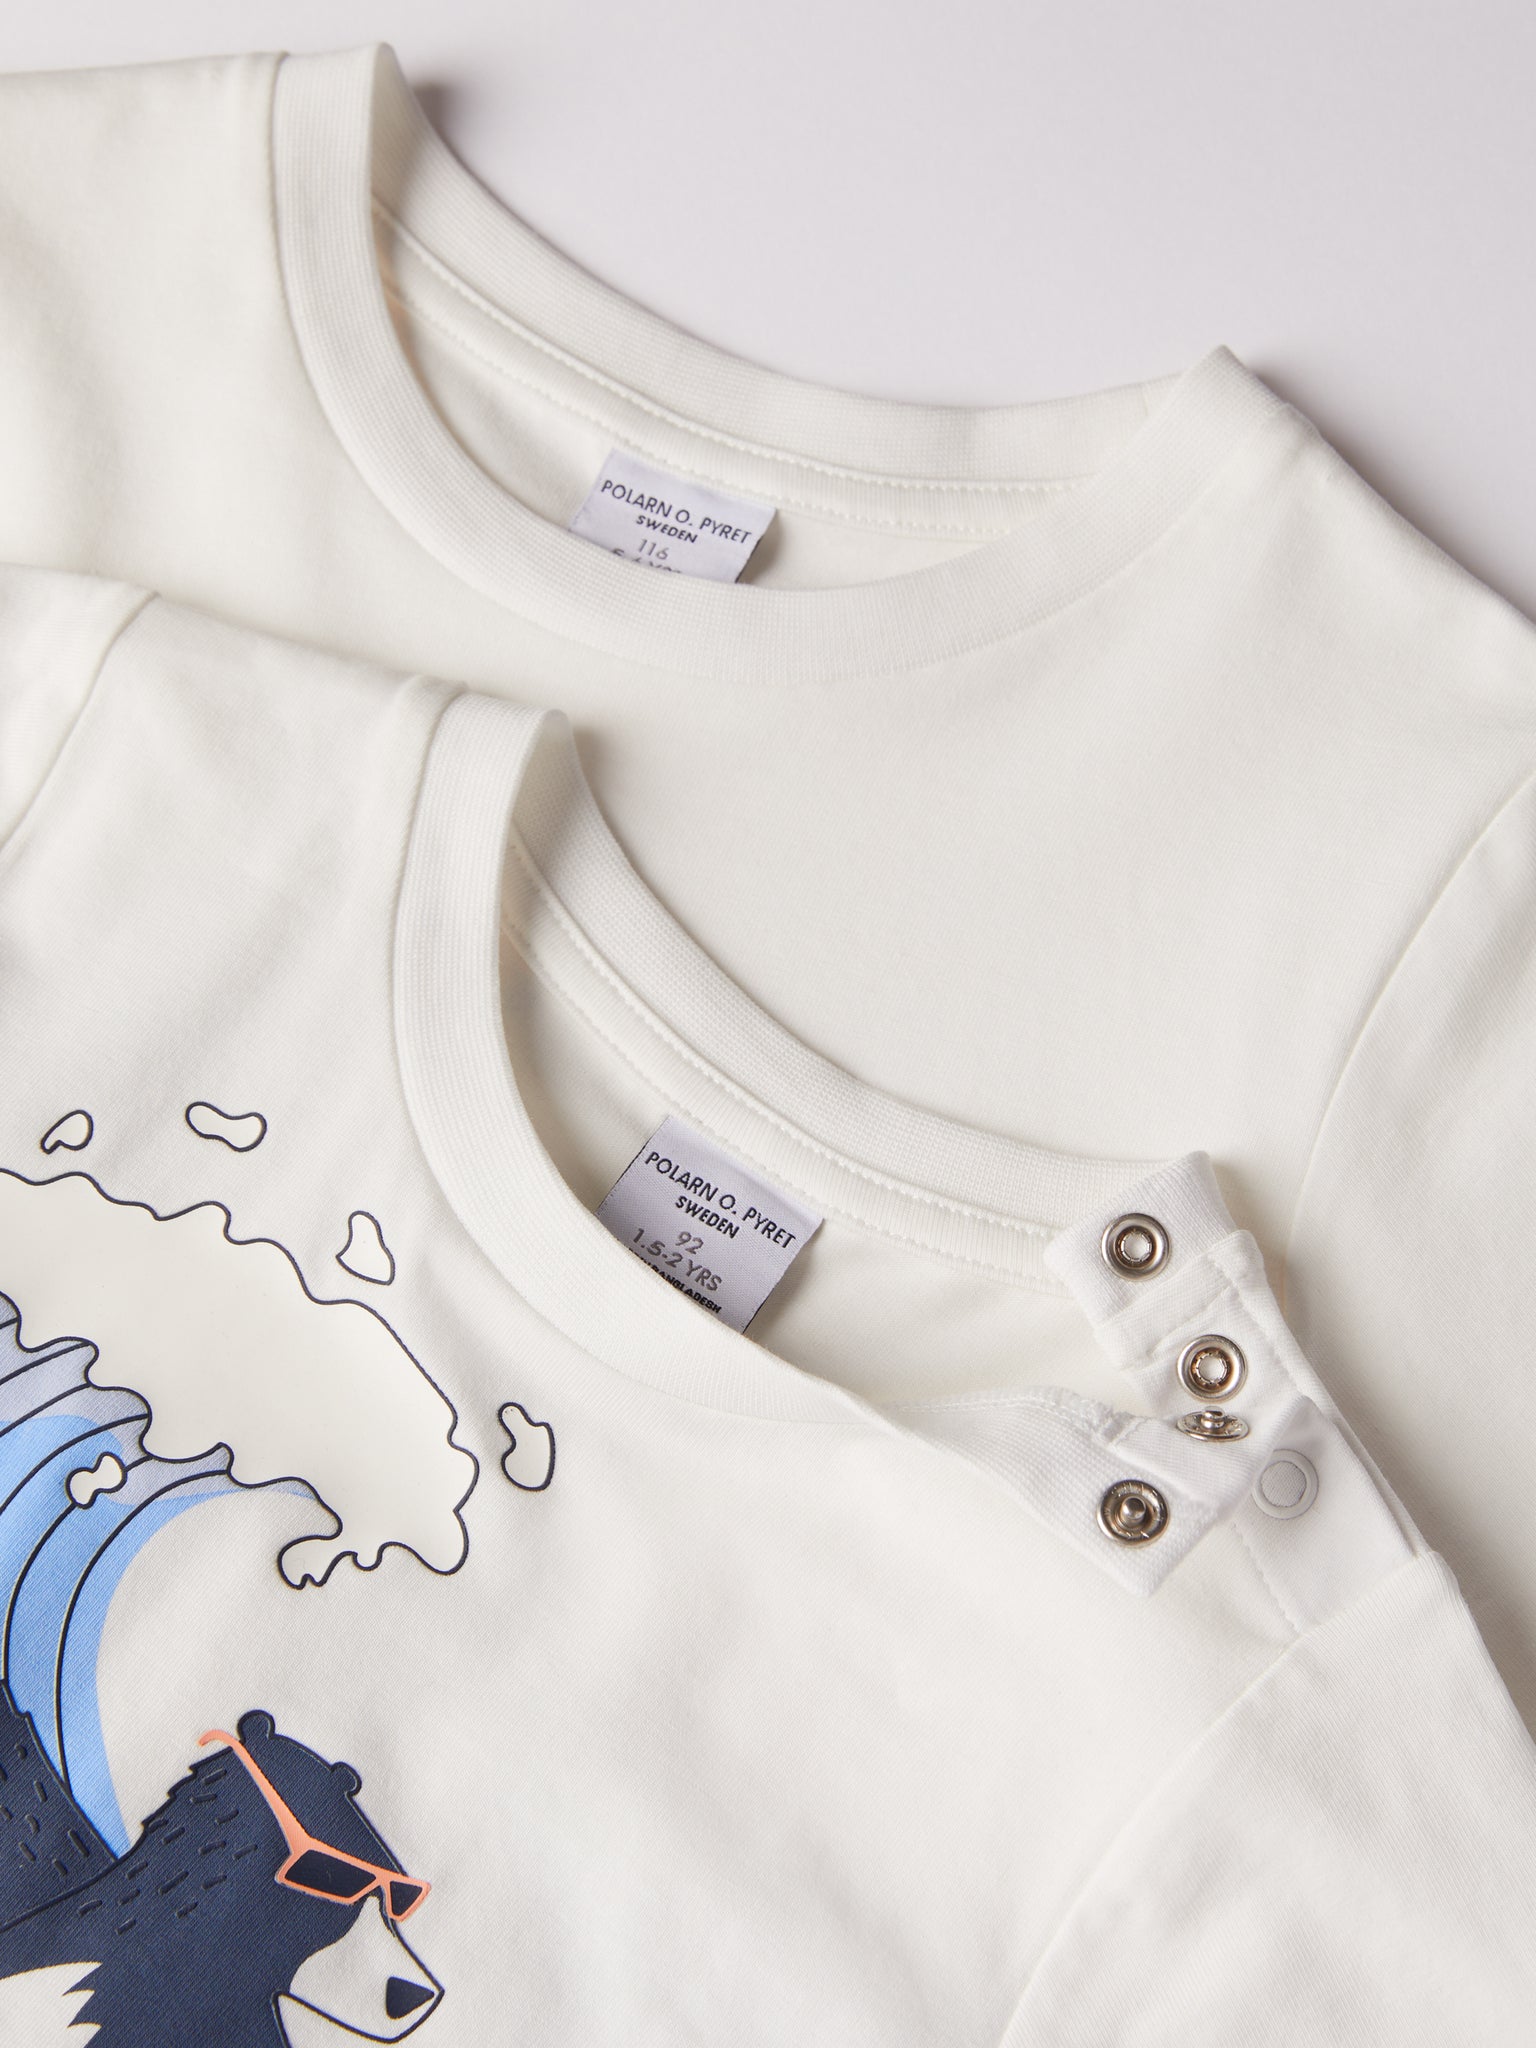 Bear Print Kids T-Shirt from the Polarn O. Pyret kidswear collection. Clothes made using sustainably sourced materials.